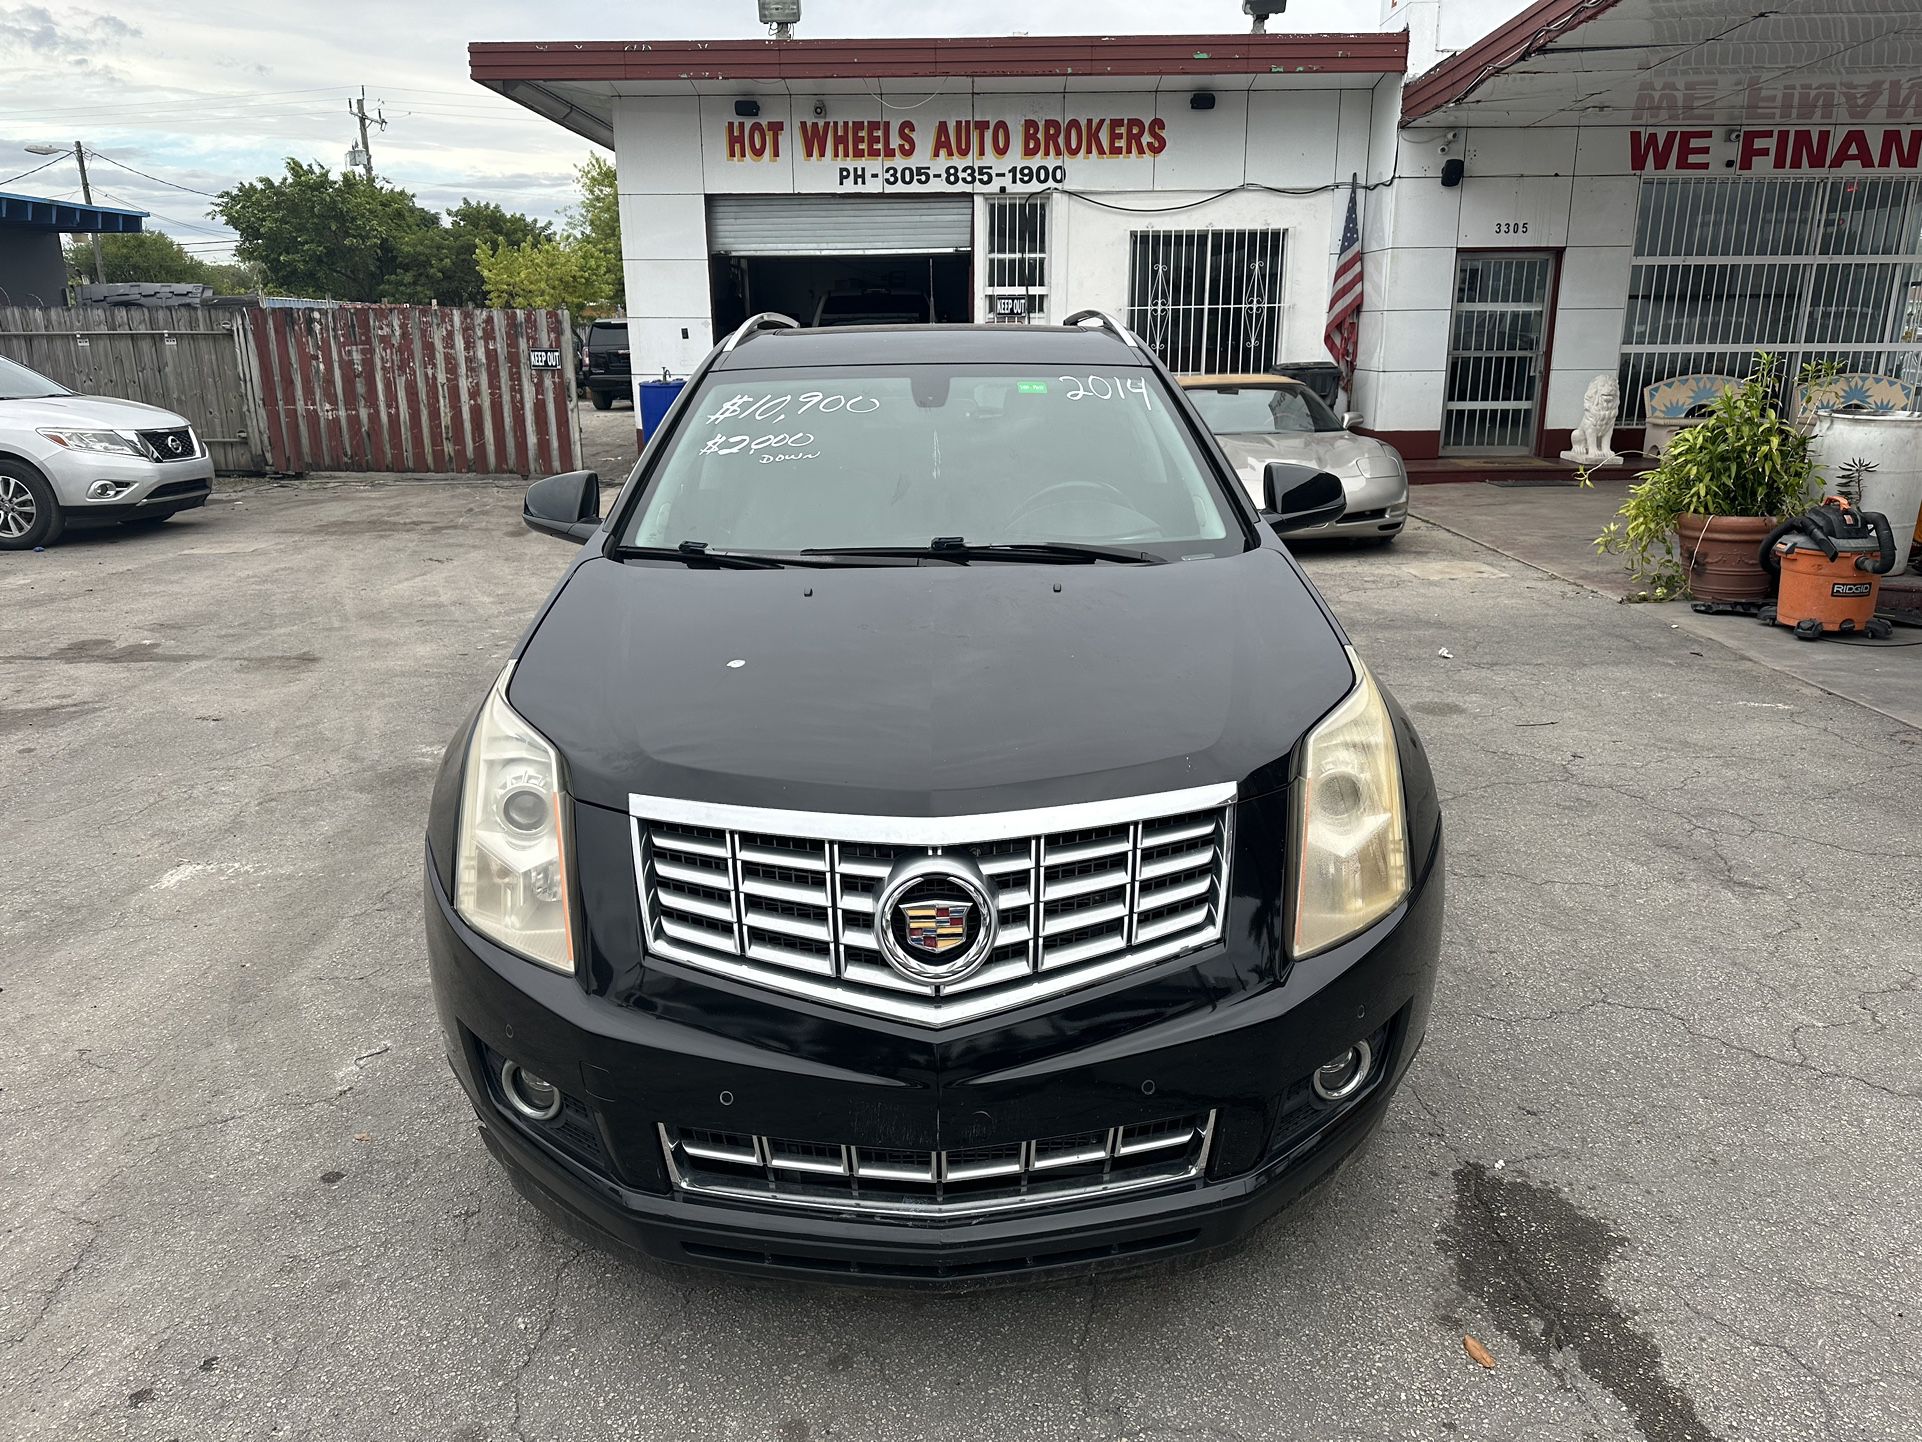 used 2014 cadillac srx - front view 2